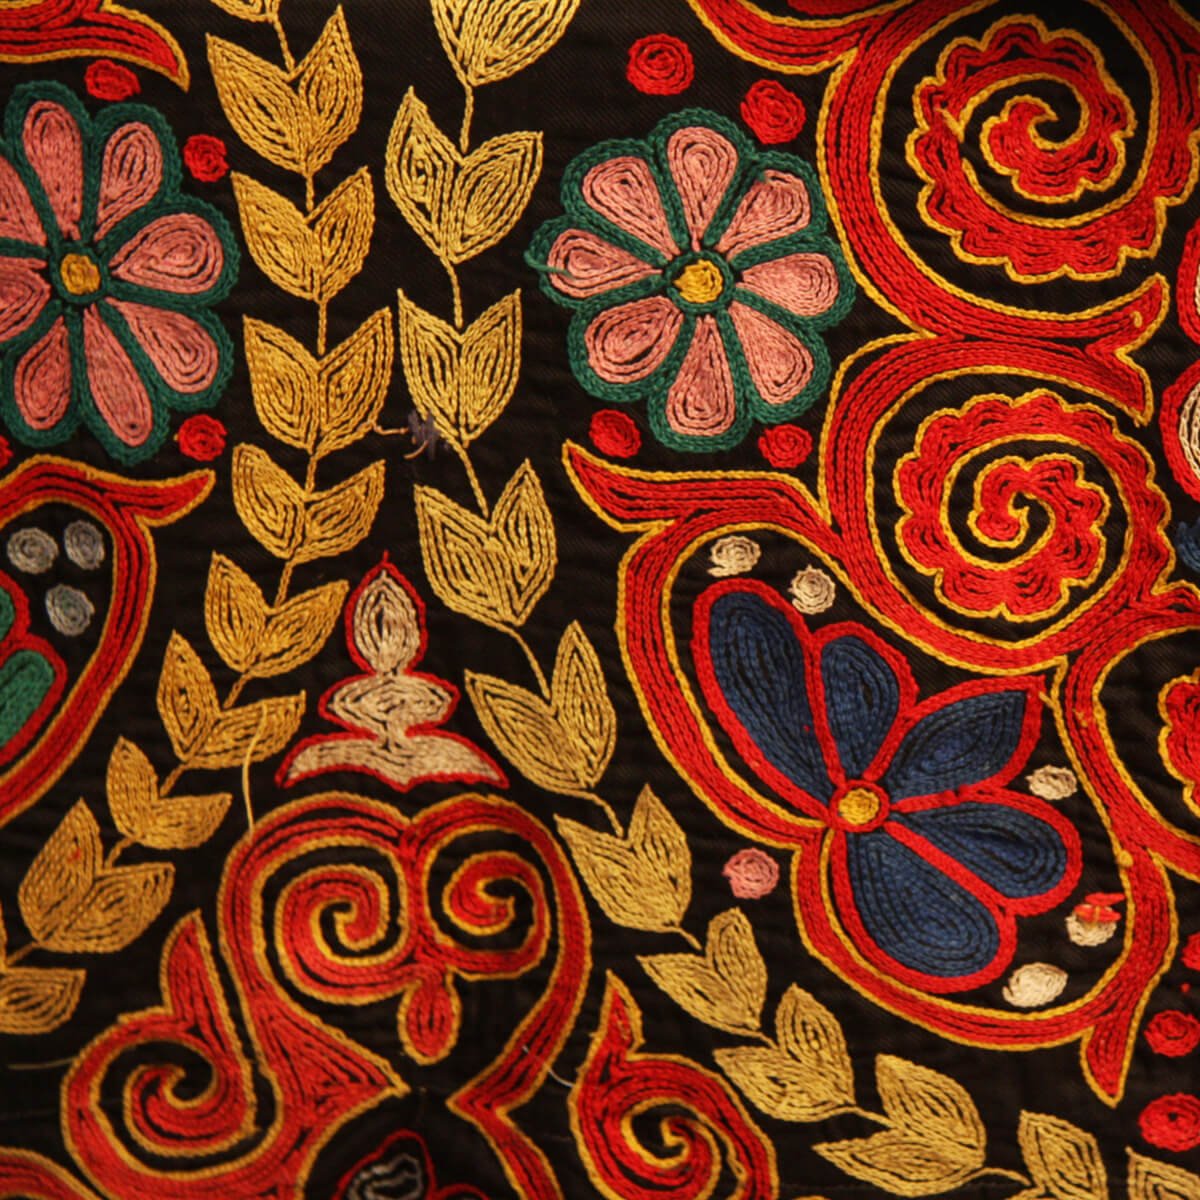 Embroidered Fabric & Textiles